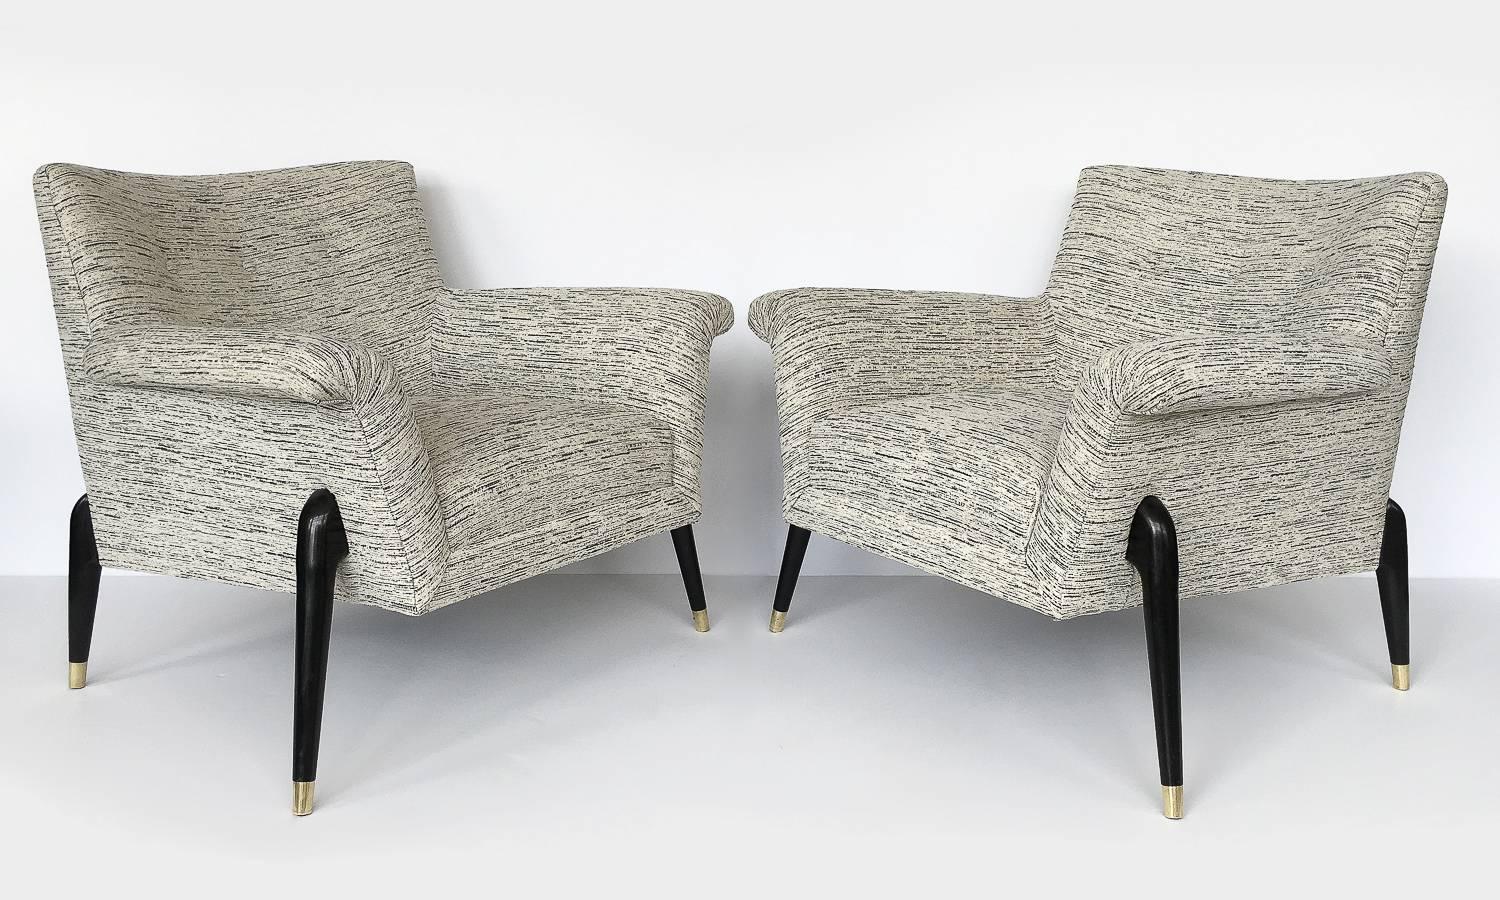 Pair of unusual Italian spider leg lounge chairs in the style of Ico Parisi or Jean Royère. Striking from all angles! Sculptural ebonized arching legs protrude from the sides of the chairs and smaller back legs are placed at 45 degrees to the chair